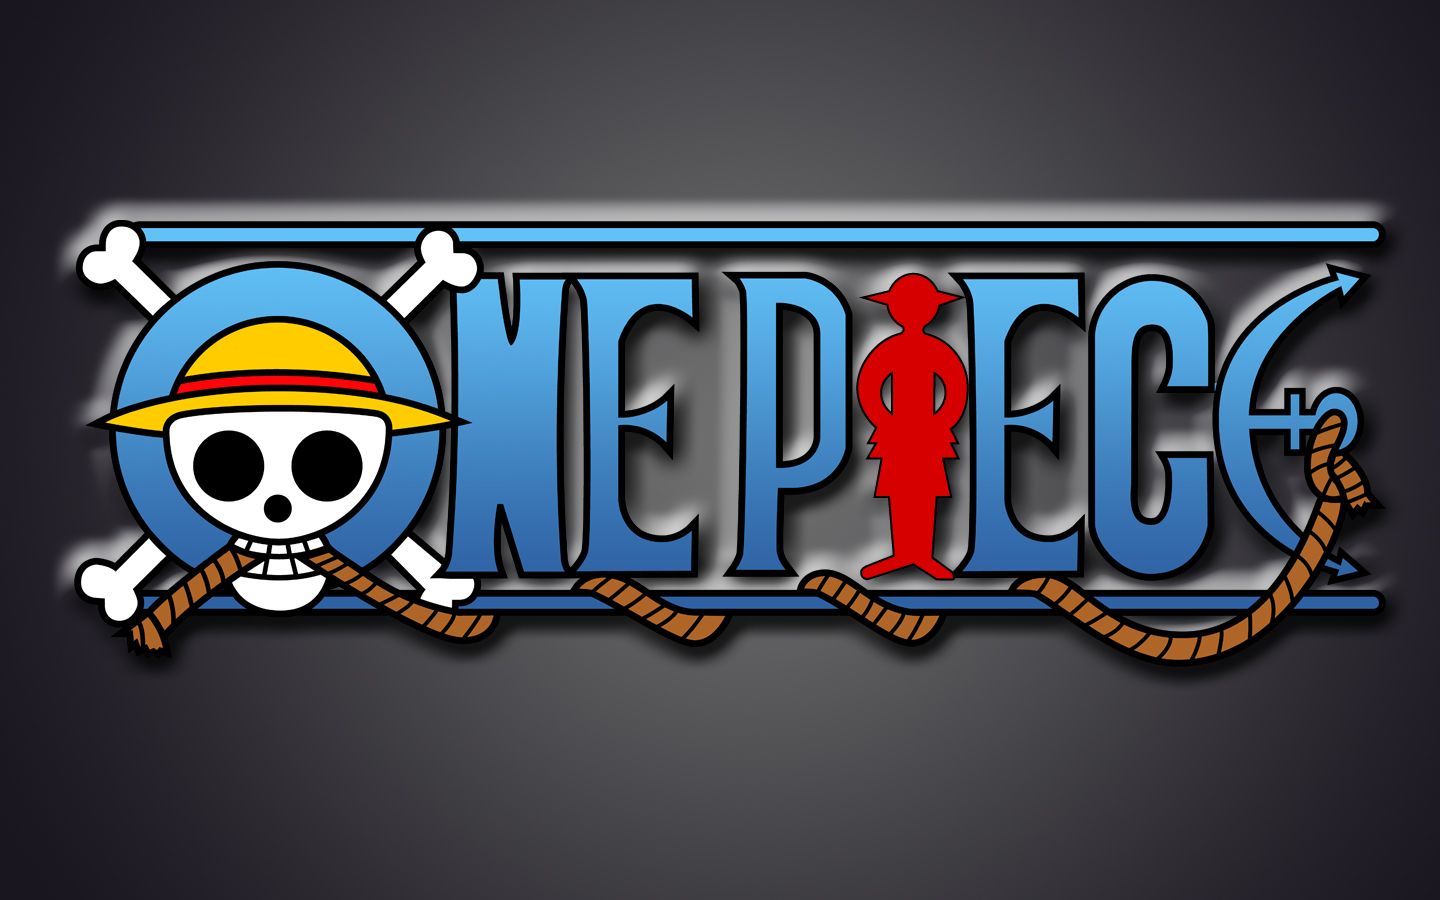 One Piece Wallpaper 1920x1080 (78+ images)